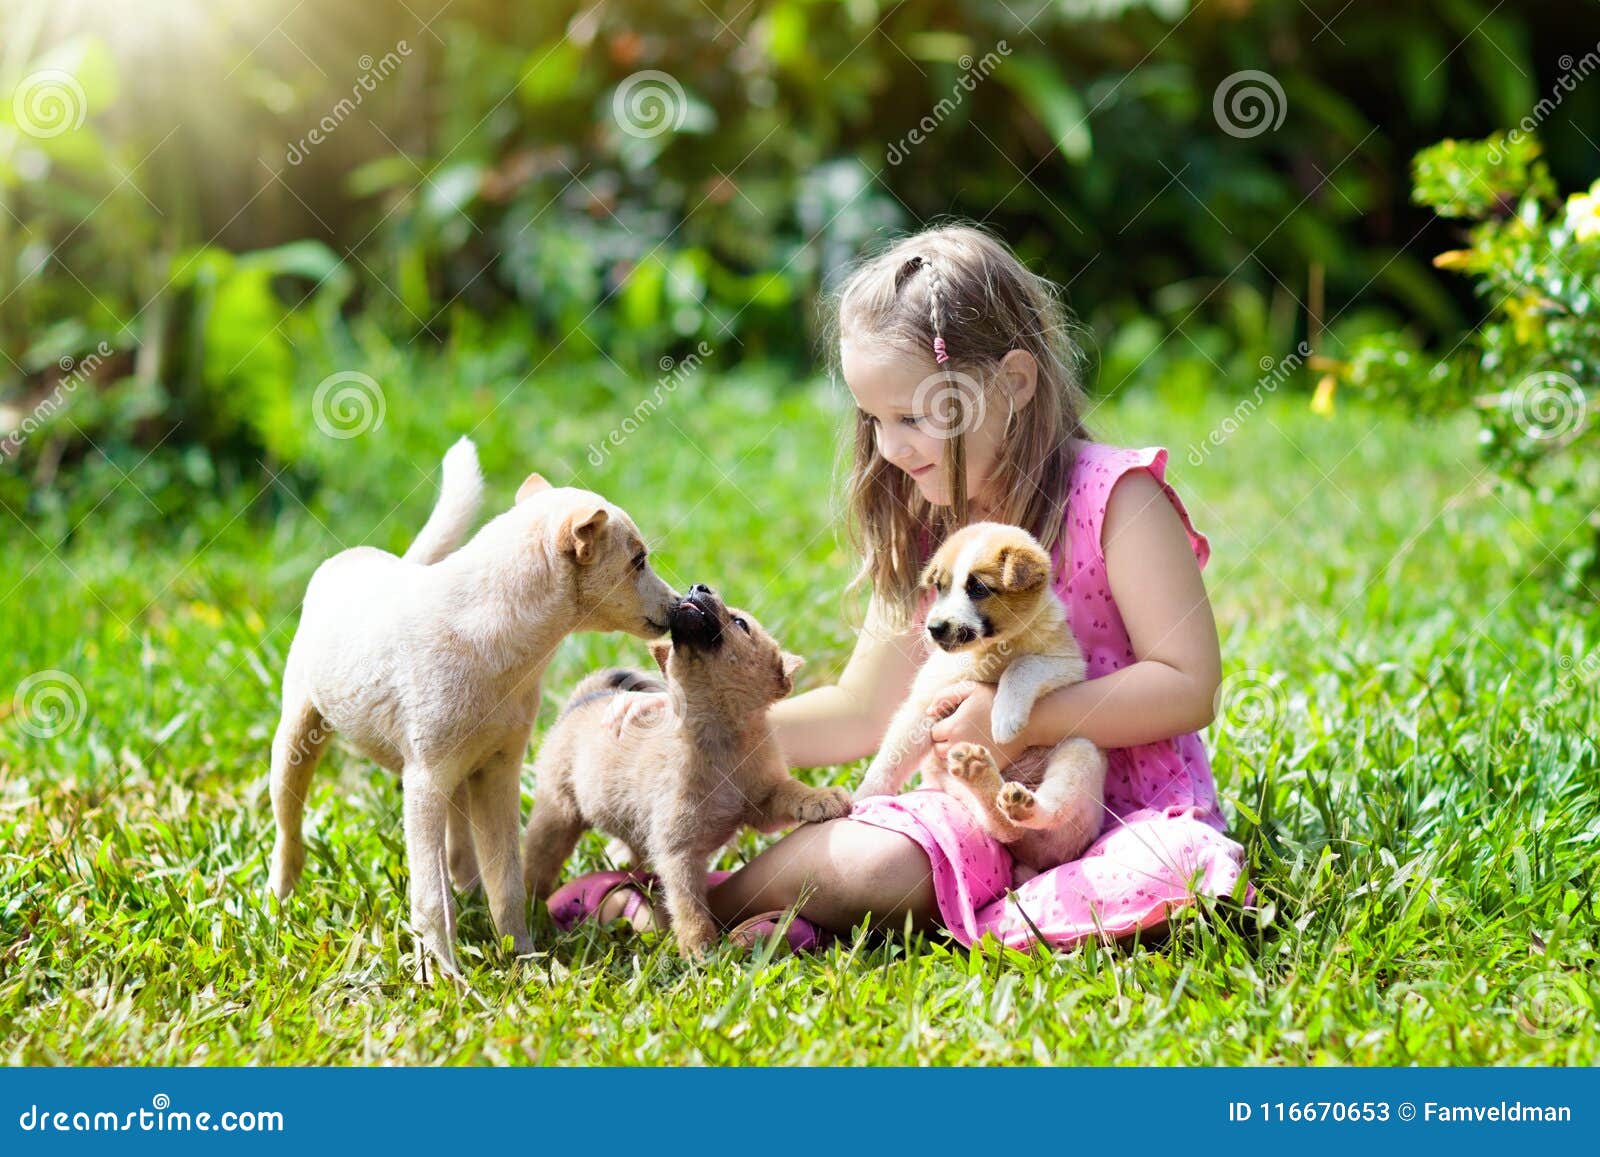 Kids Play with Puppy. Children and Dog in Garden. Stock Image - Image of  people, park: 116670653